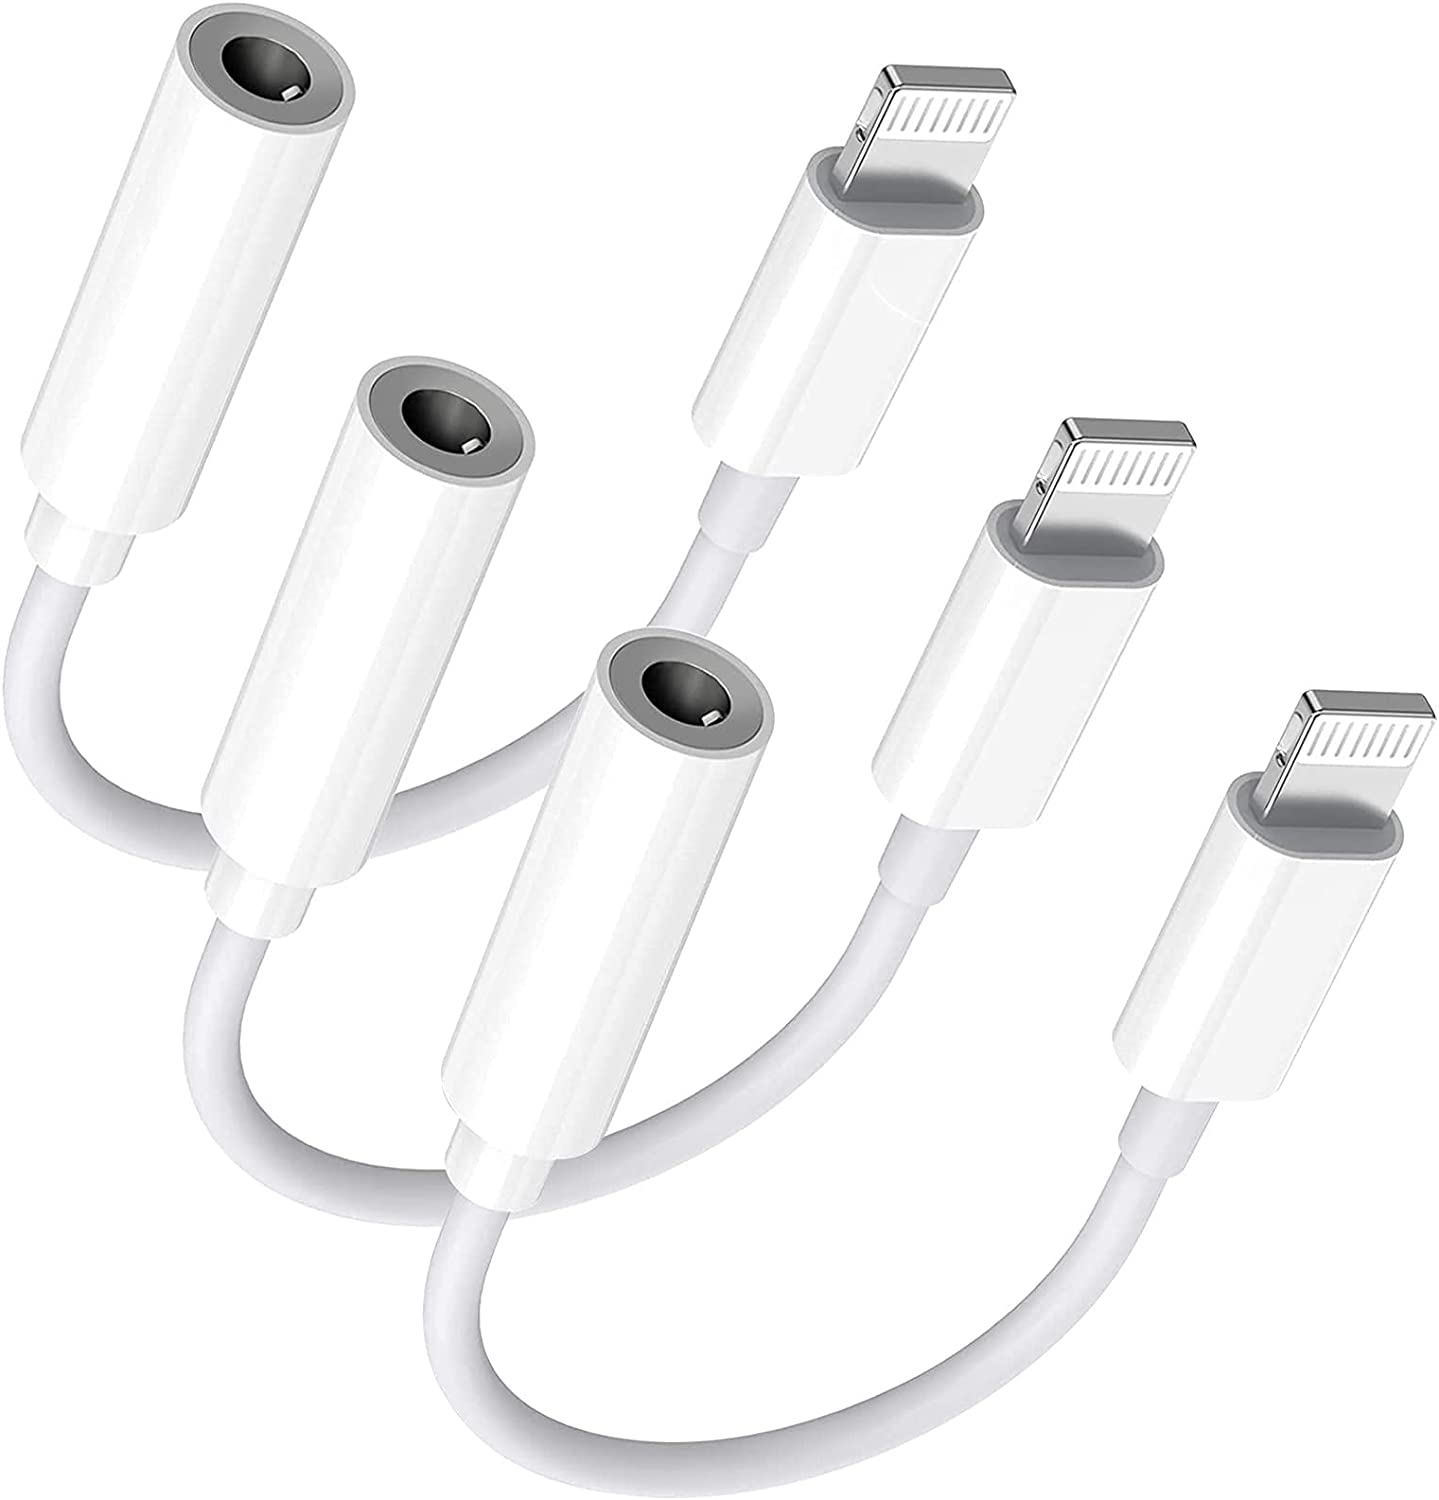 Apple MFi Certified Lightning to 3.5 mm Headphone Adapter Dual Ports Dongle Charger Jack&AUX Audio 3.5 mm Earphone Accessory,for iPhone 11/11 Pro/X/8,7 Plus/8 Plug and Play Support All iOS System 